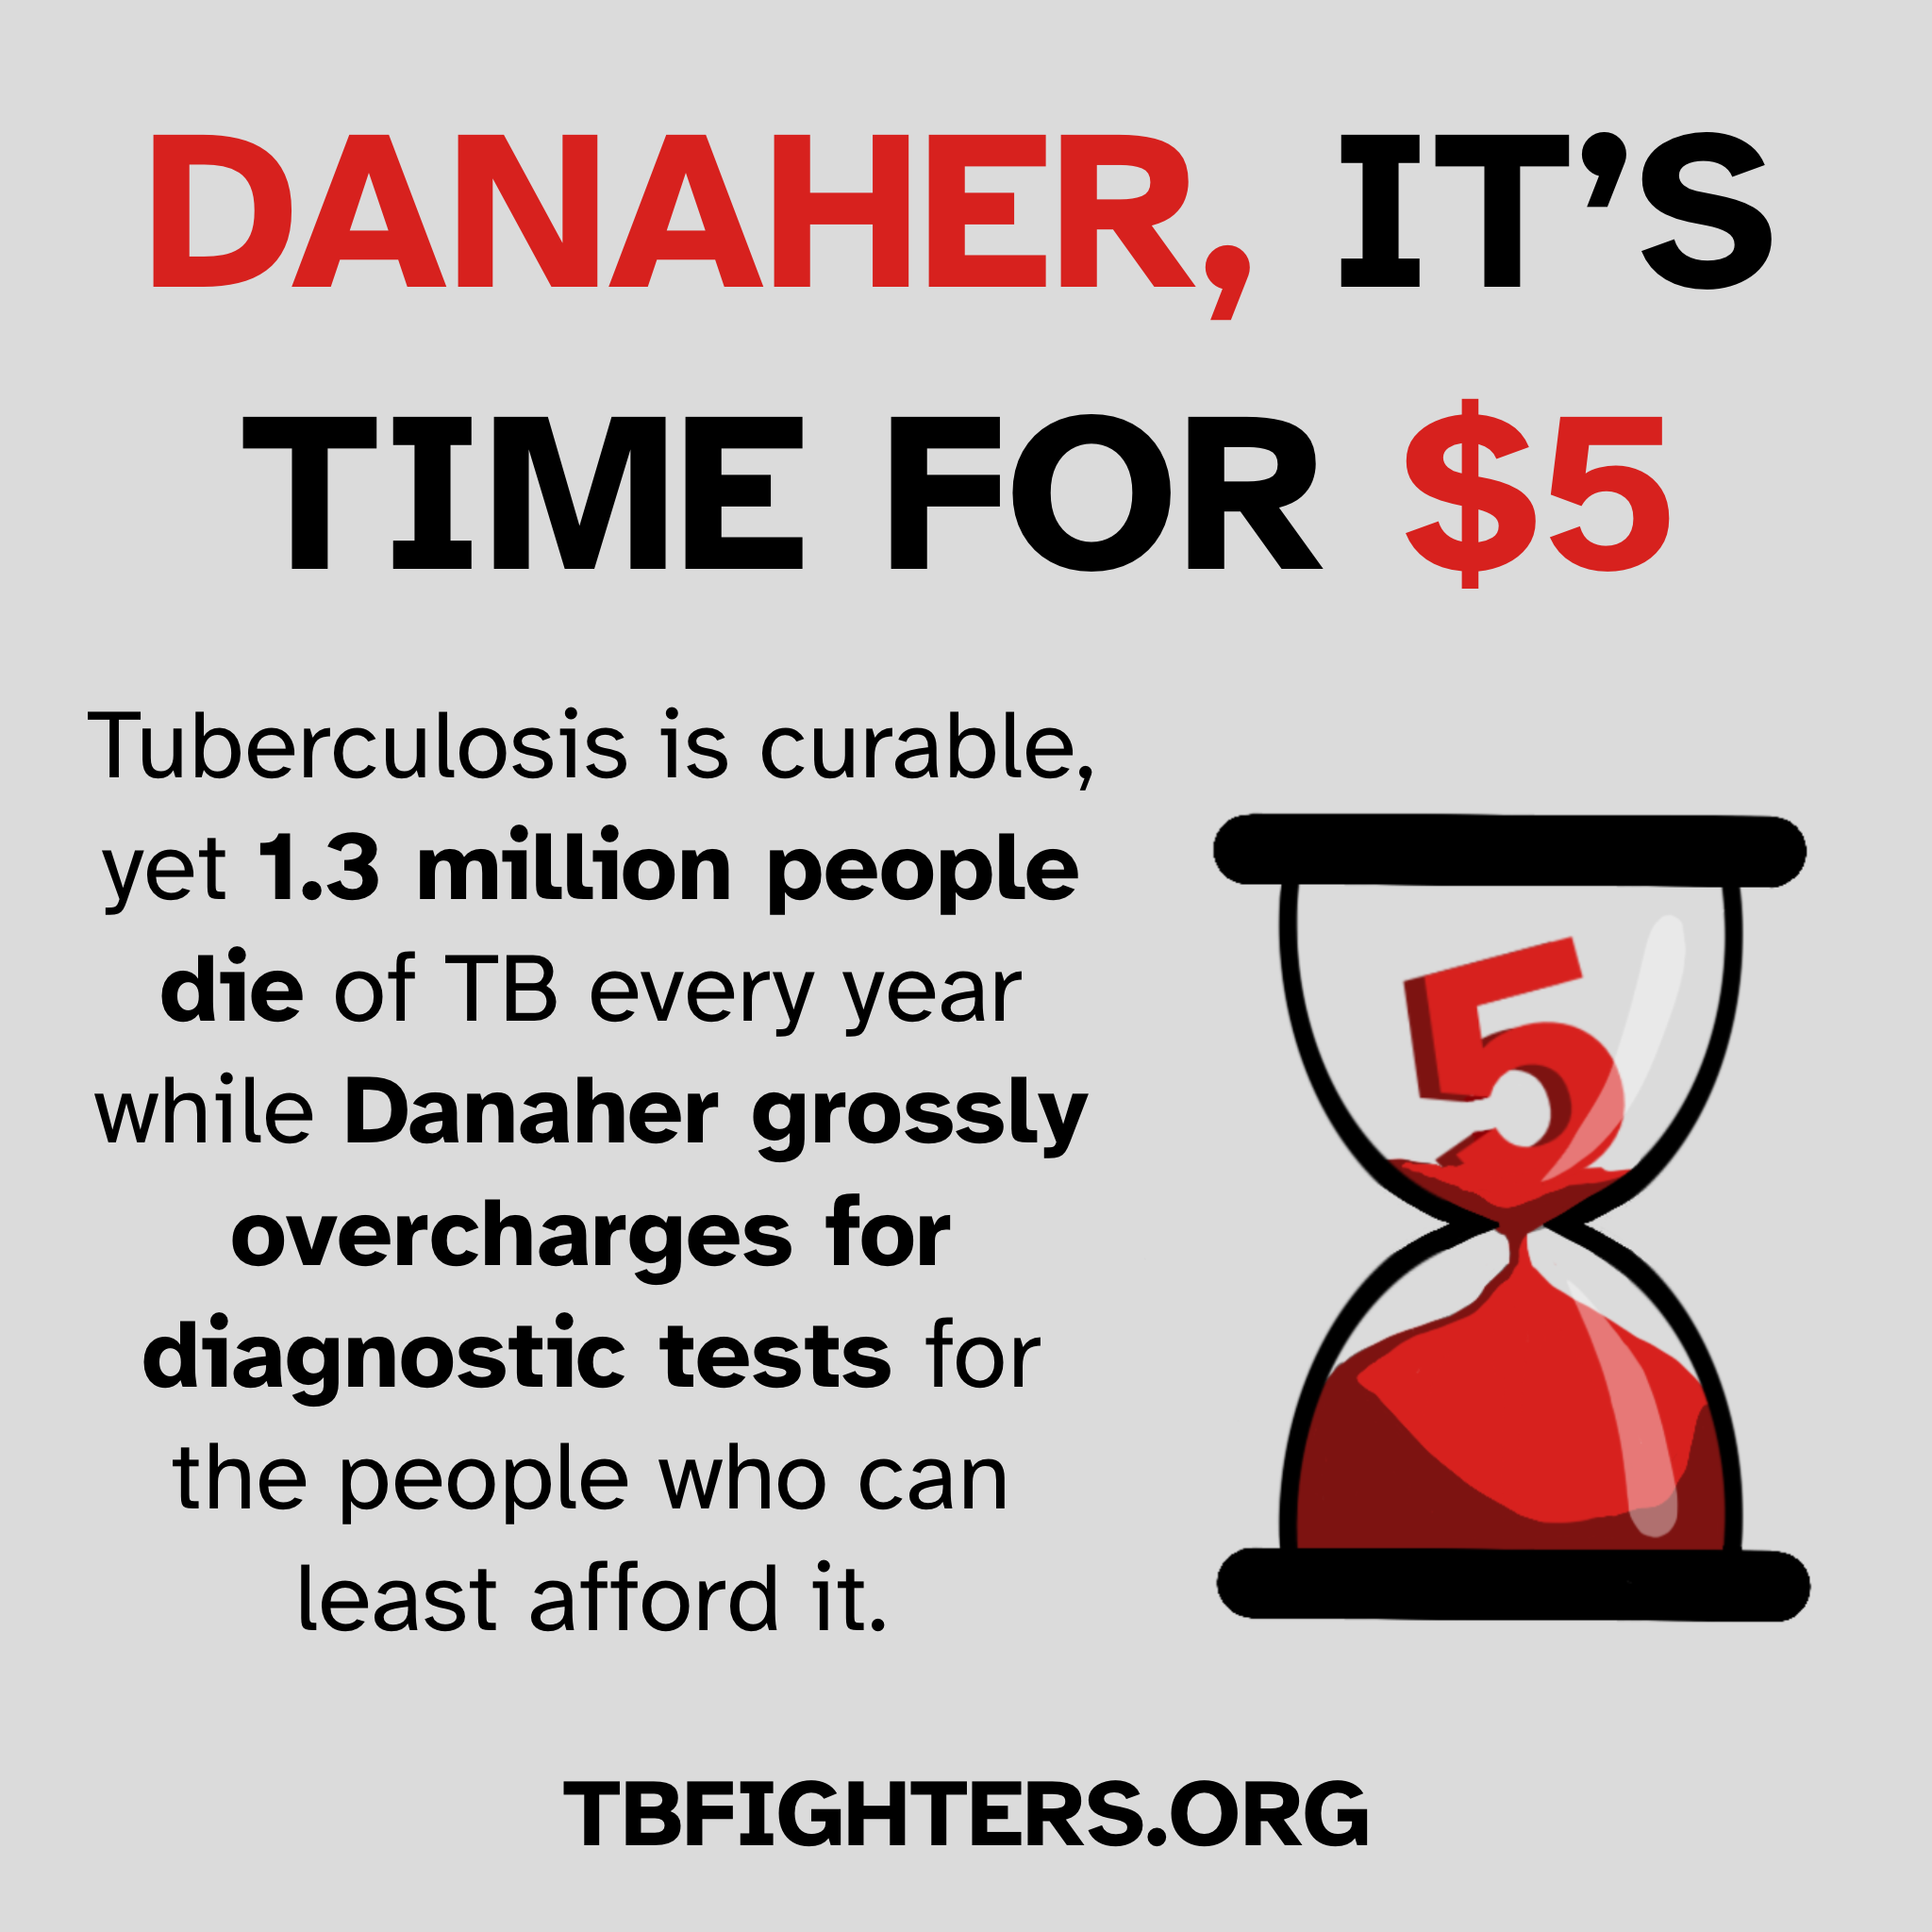 Danaher, it’s time for $5. Tuberculosis is curable, yet 1.3 million people die of TB every year while Danaher grossly overcharges for diagnostic tests for the people who can least afford it. The footer is: TBFIGHTERS.ORG. An hourglass with red sand and “TB” in the top section.